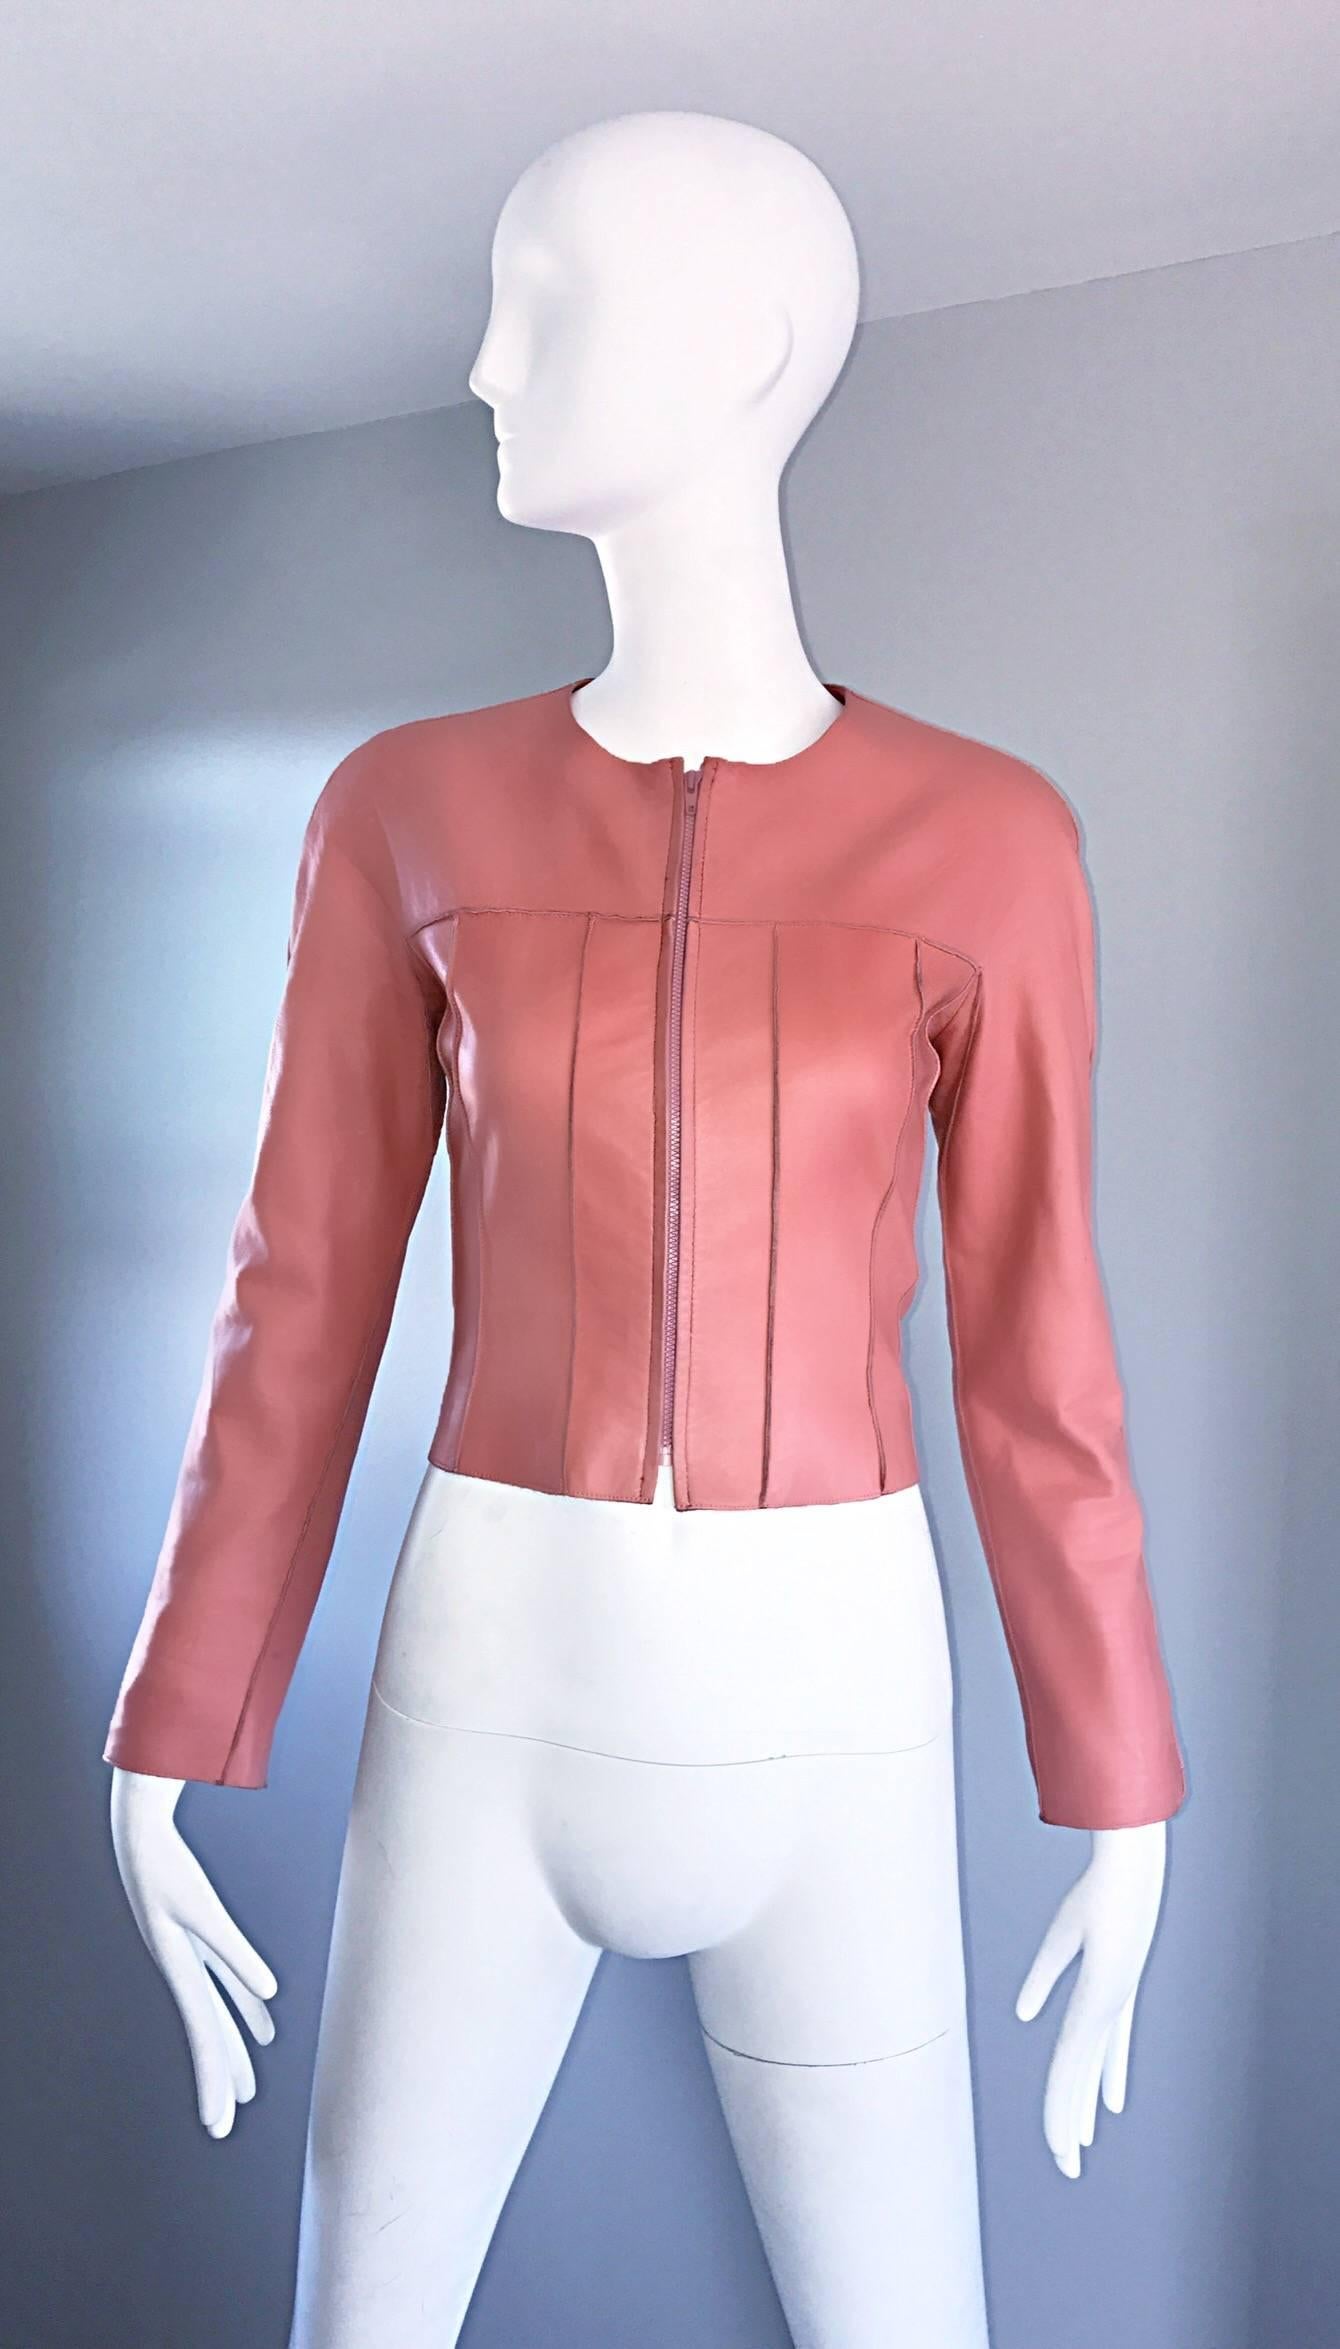 Amazing and rare vintage CHANEL 1990s / 90s bubblegum pink lambskin leather cropped jacket! Super soft leather. Full zipper up the front. Expertly tailored, with a fantastic fitted bodice, and tailored long sleeves. Intricate stitching throughout.